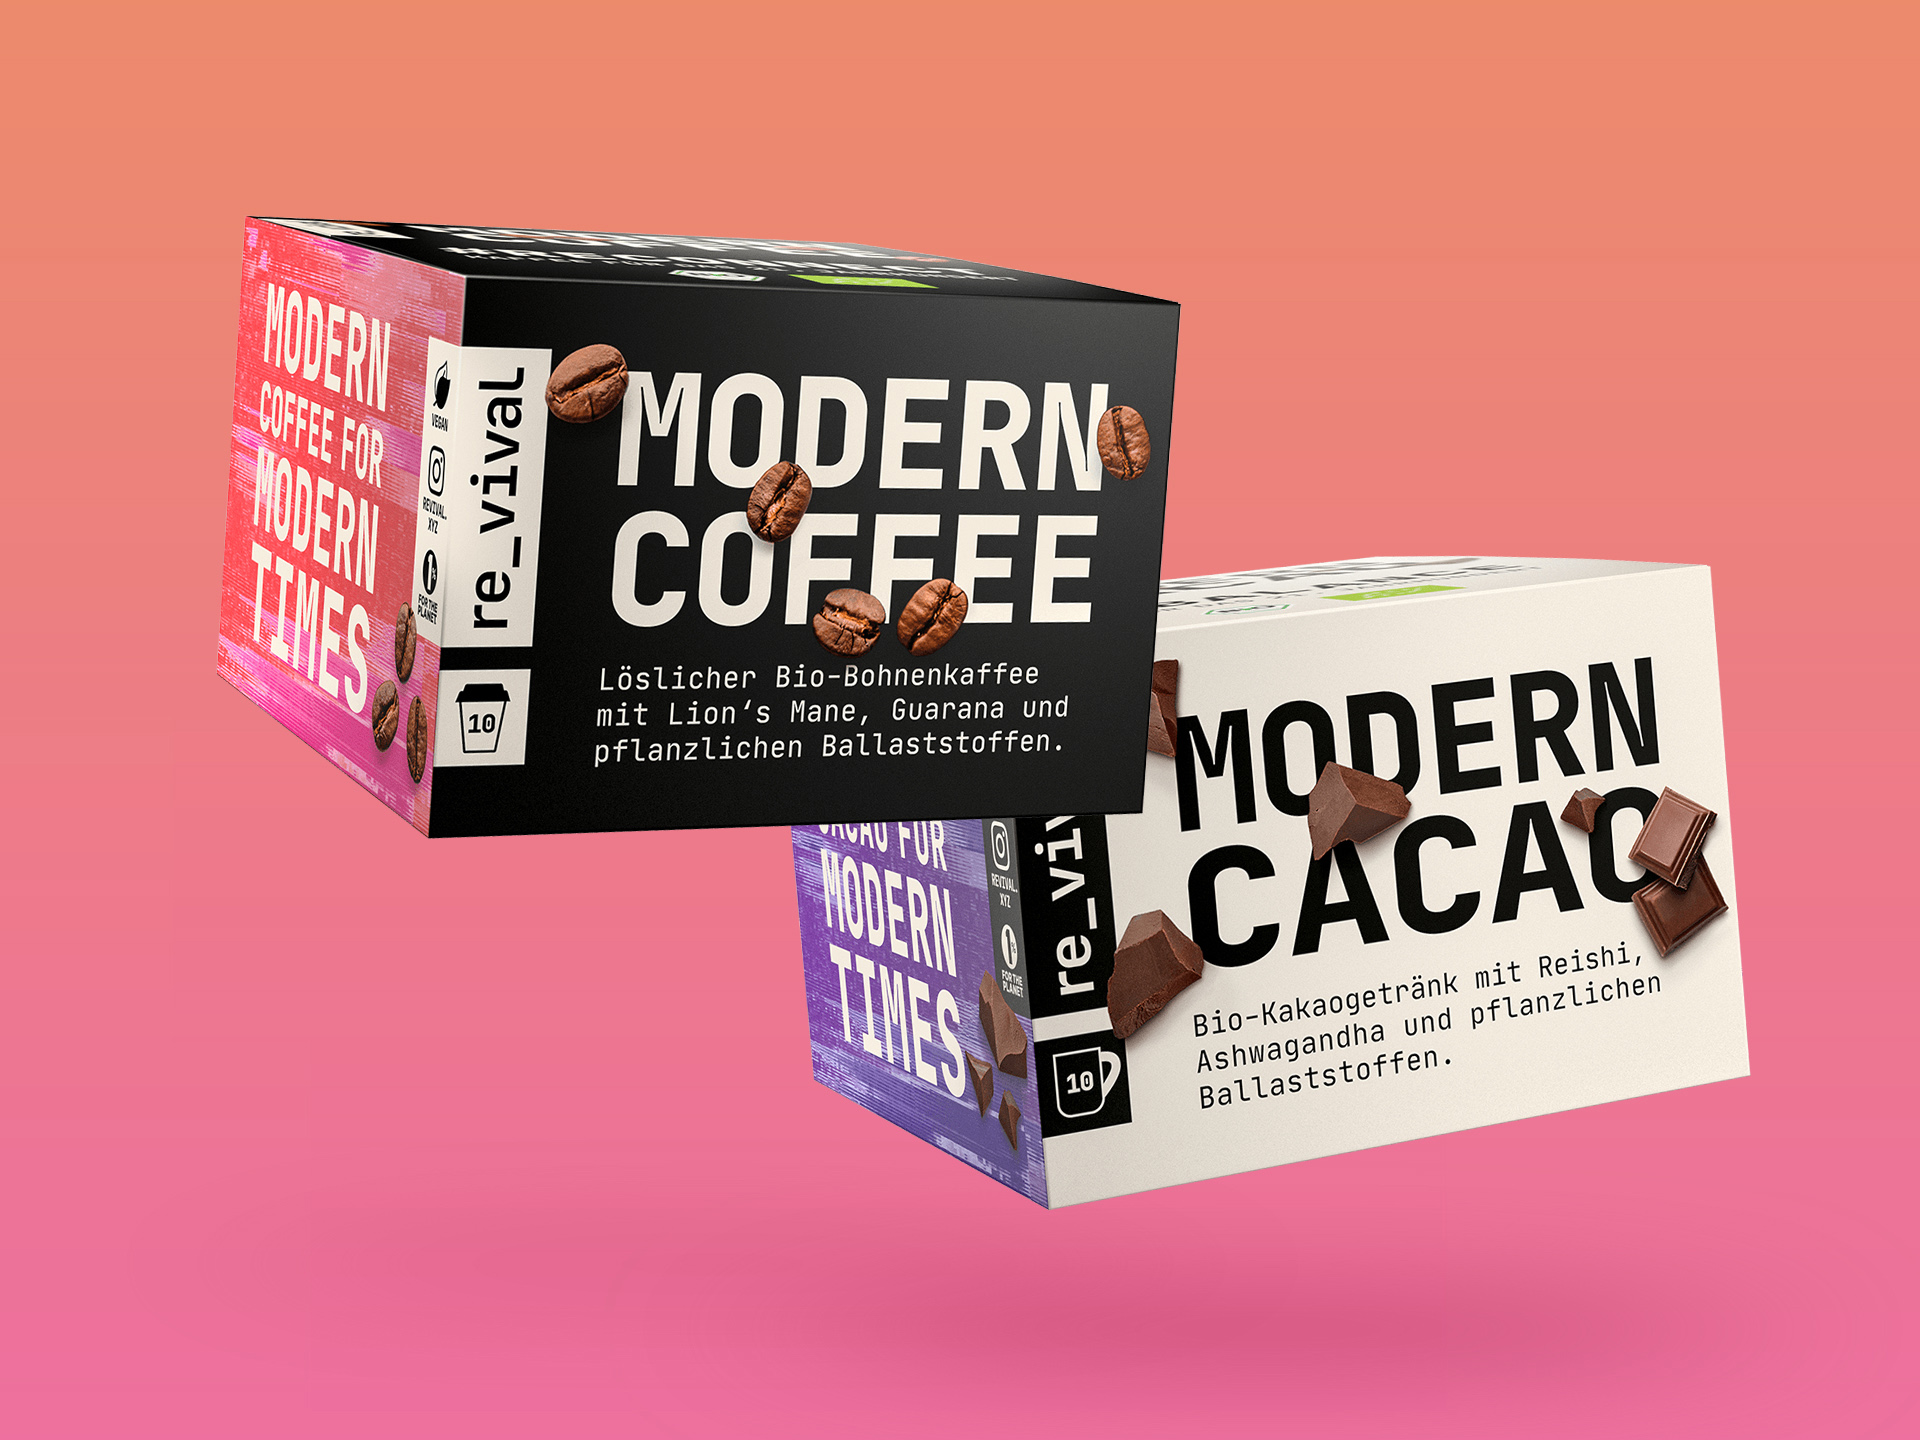 Branding and Packaging Design for Modern Coffee Brand Revival